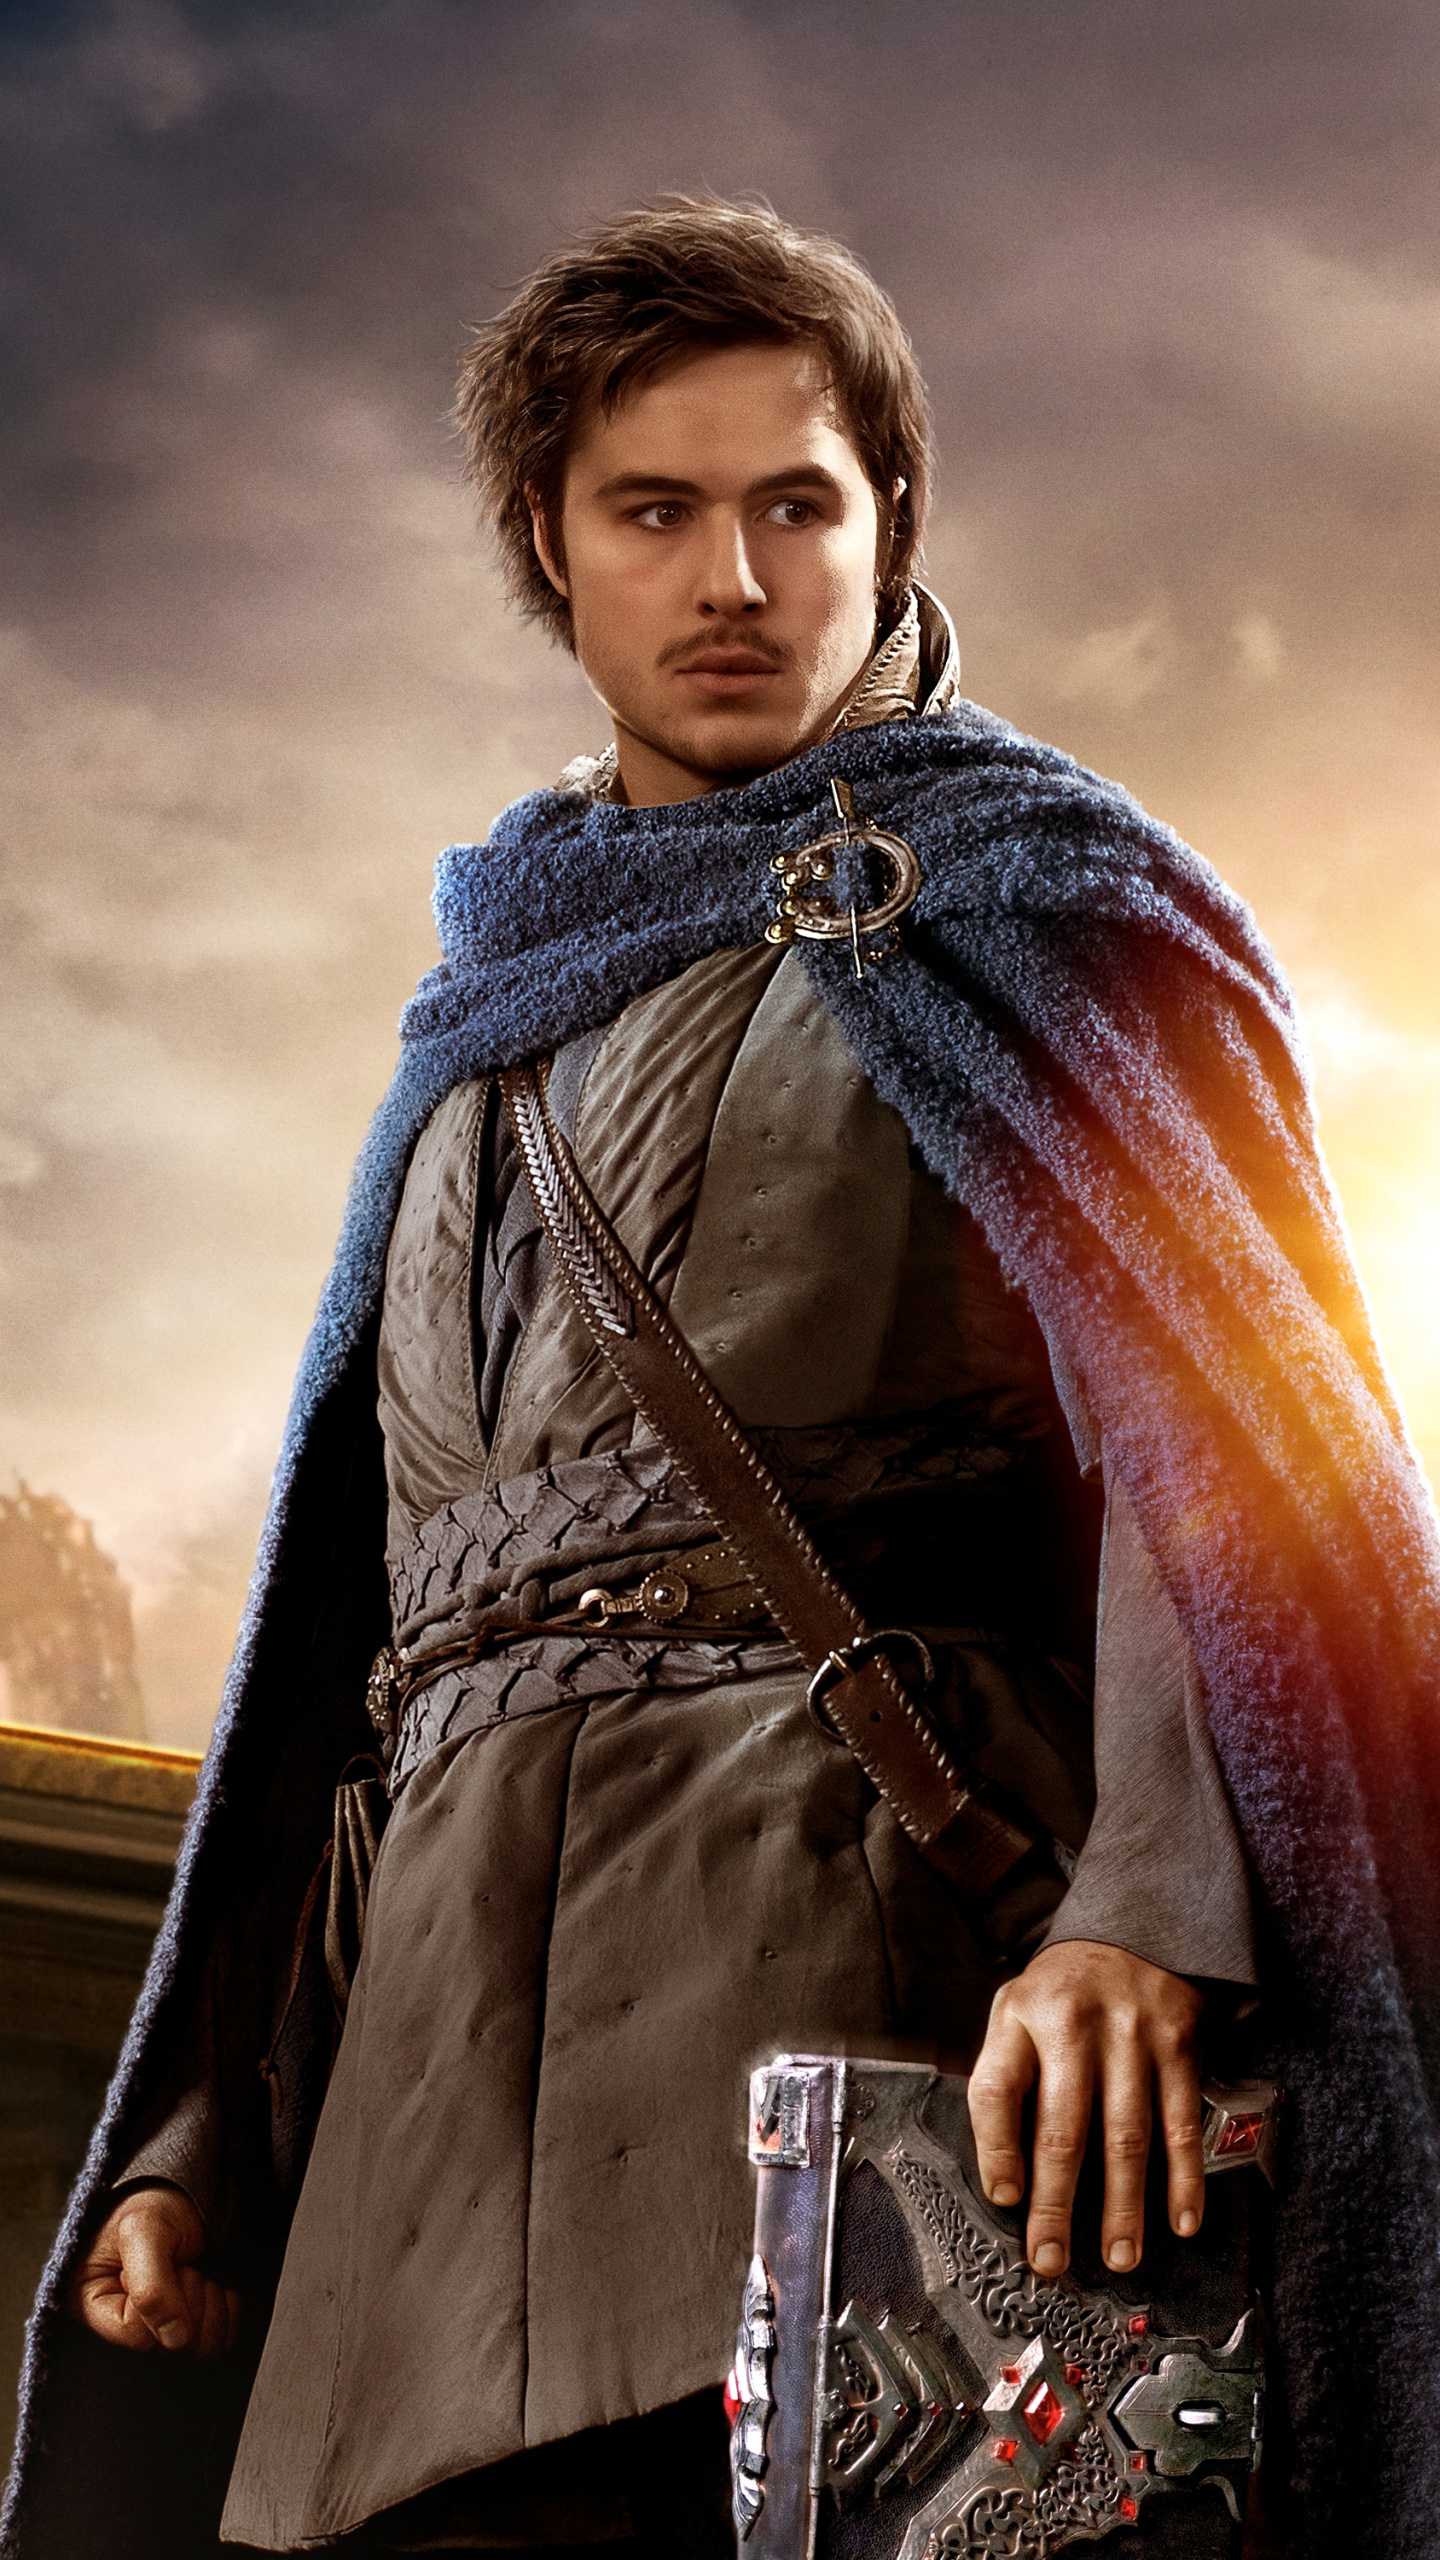 Warcraft (Movie): Ben Schnetzer as Khadgar, a young mage who was trained by the Kirin Tor. 1440x2560 HD Wallpaper.